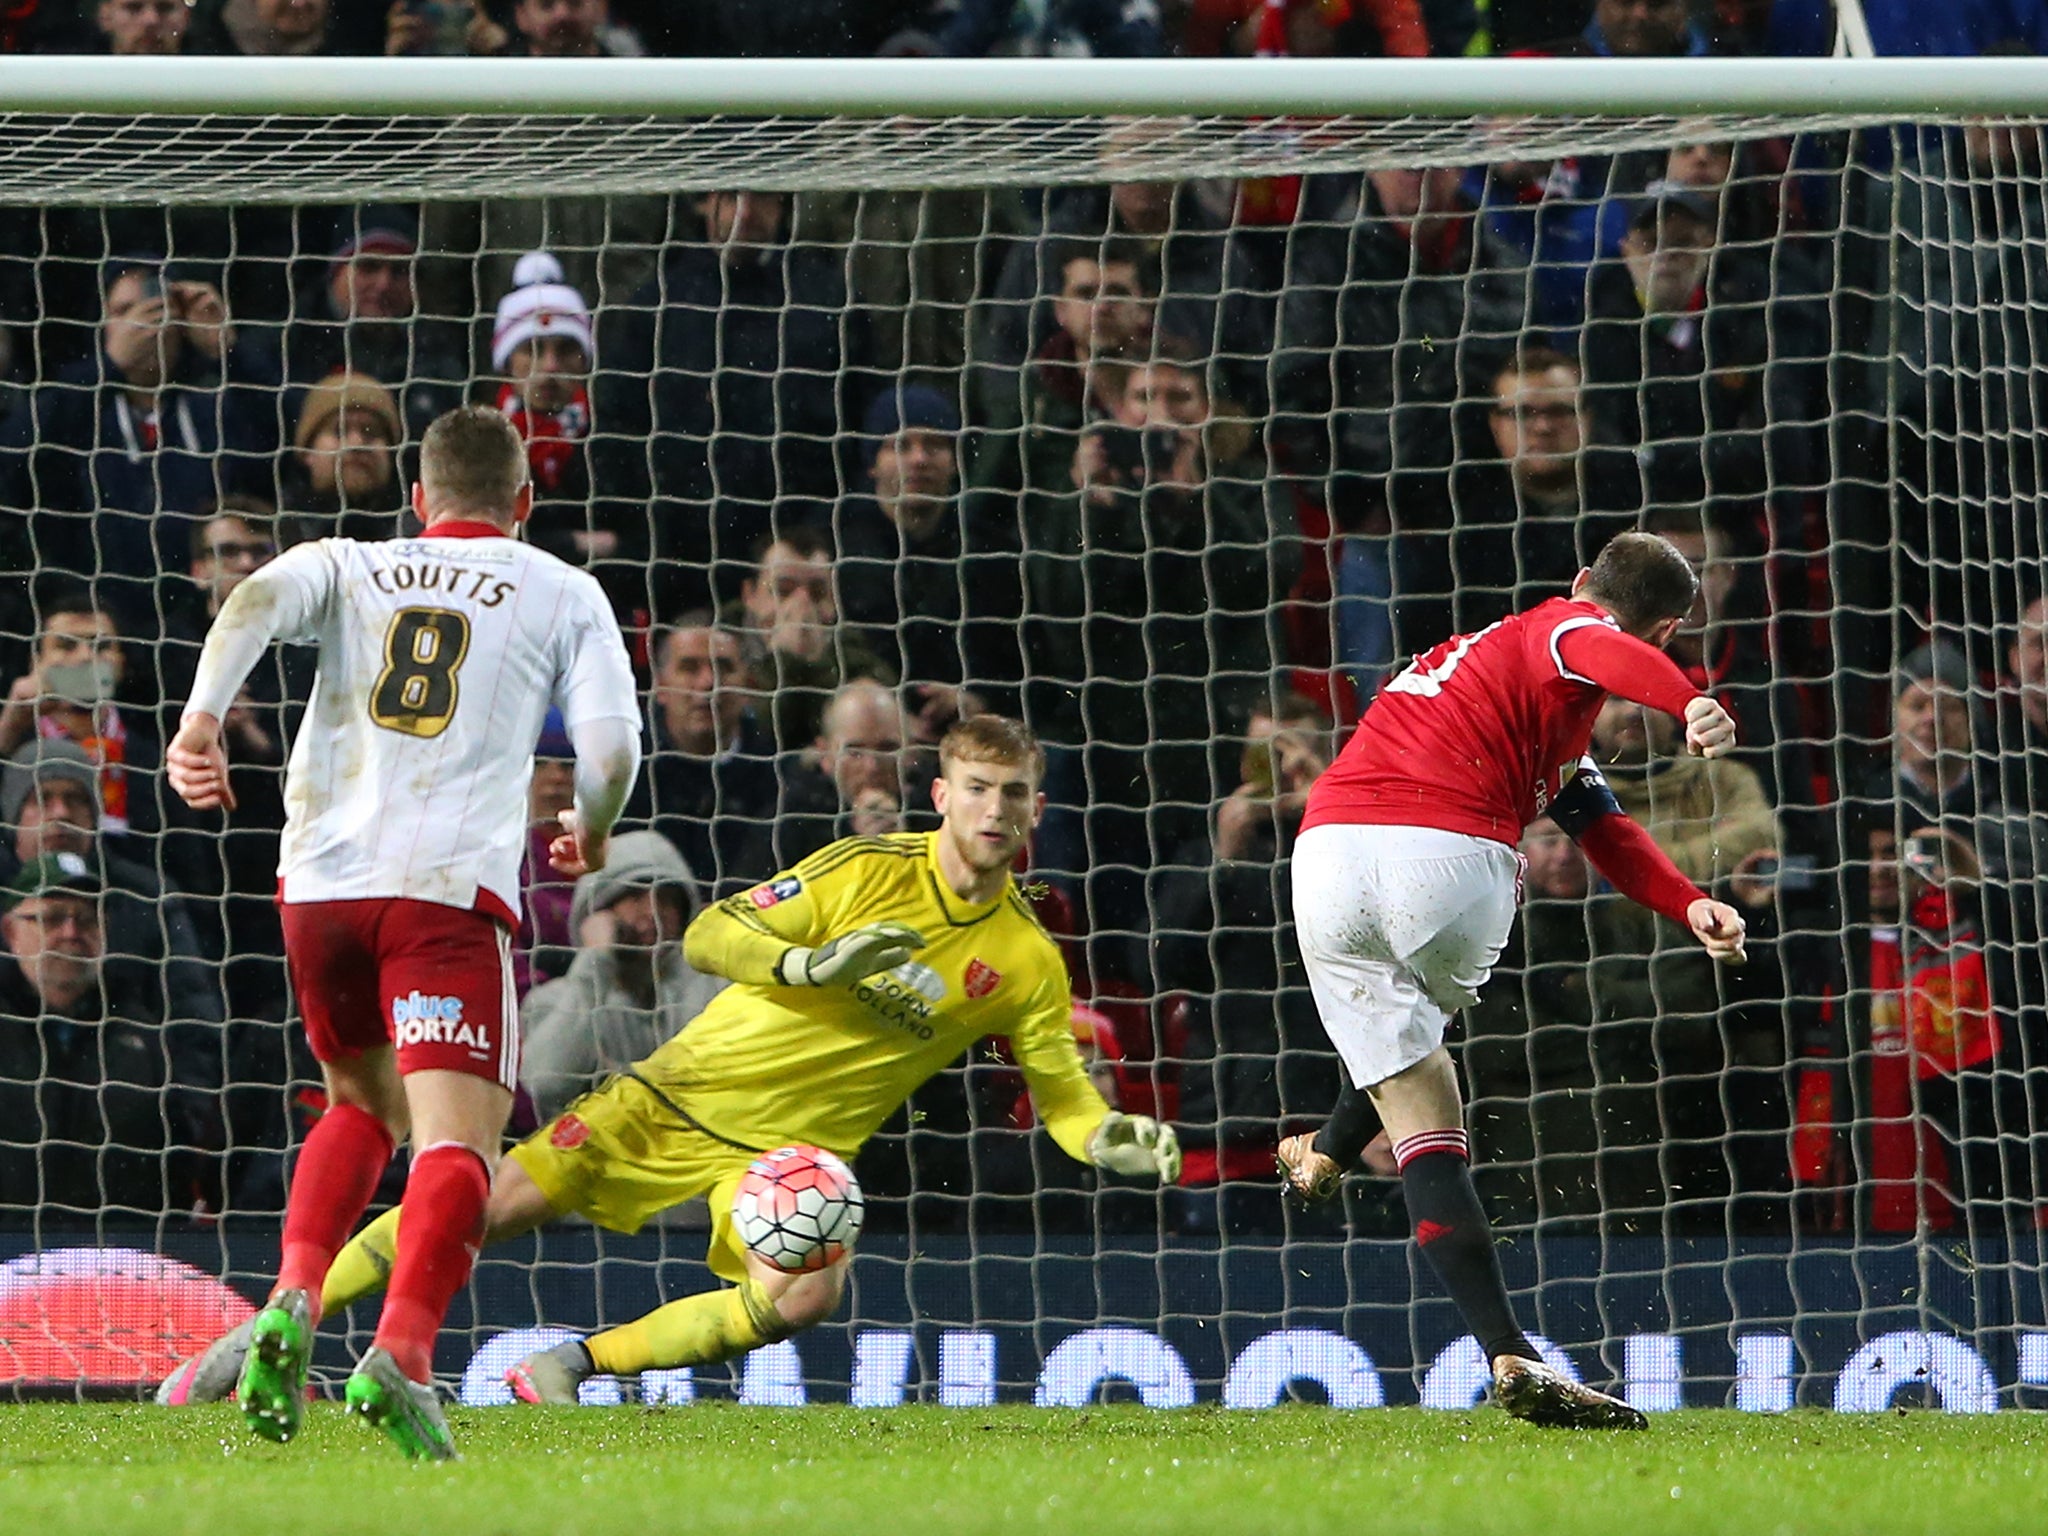 Wayne Rooney spares United blushes with a 92nd minute penalty